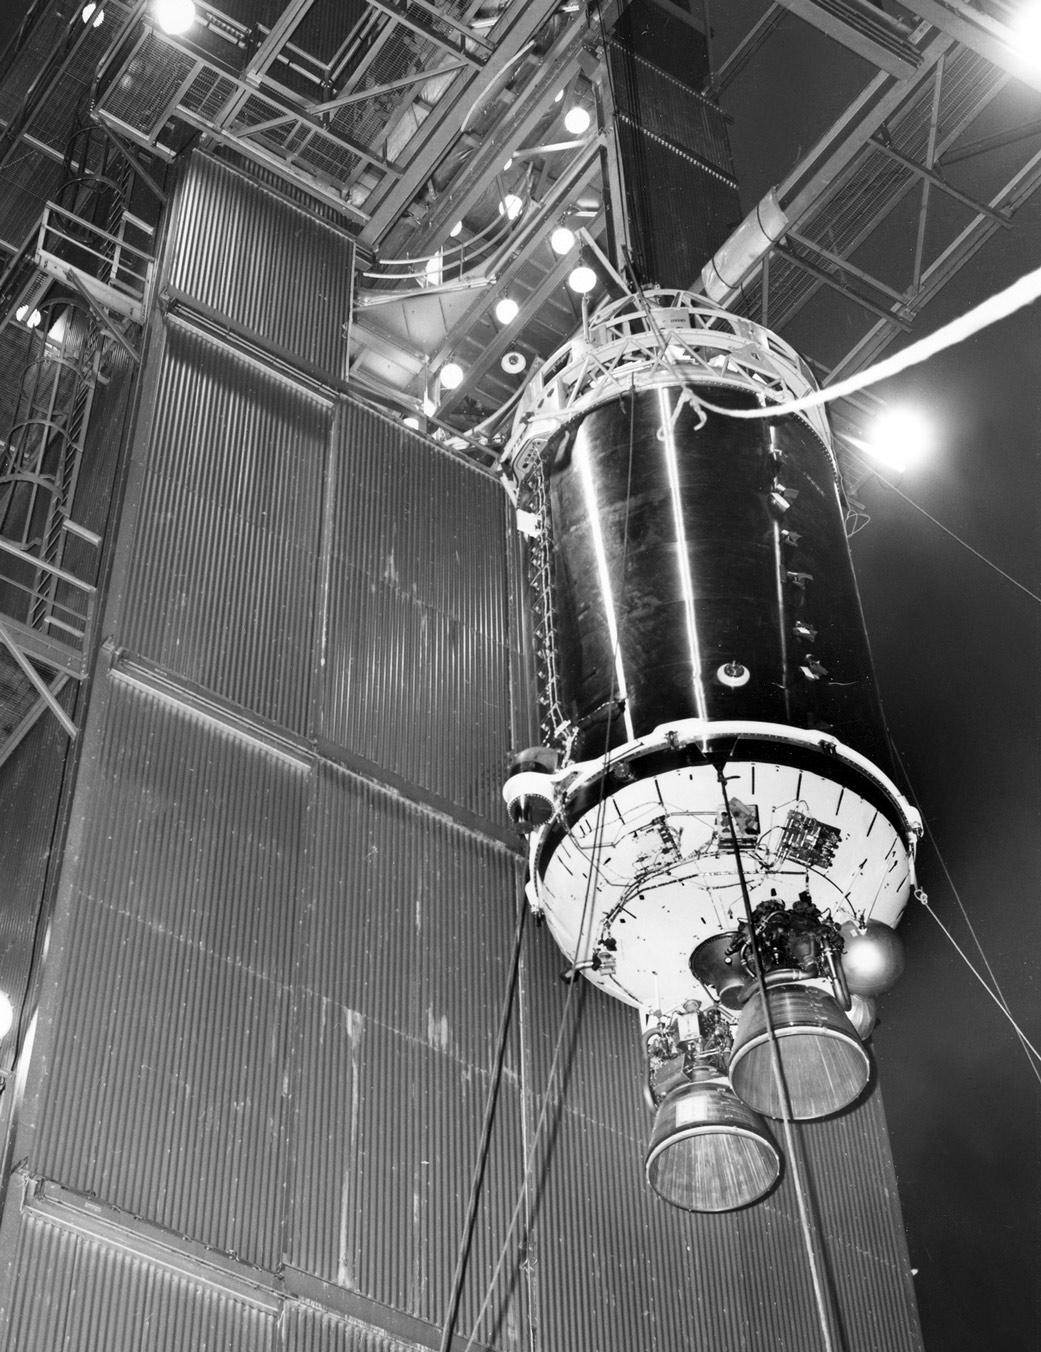 This 1964 photograph shows a Centaur upper-stage rocket